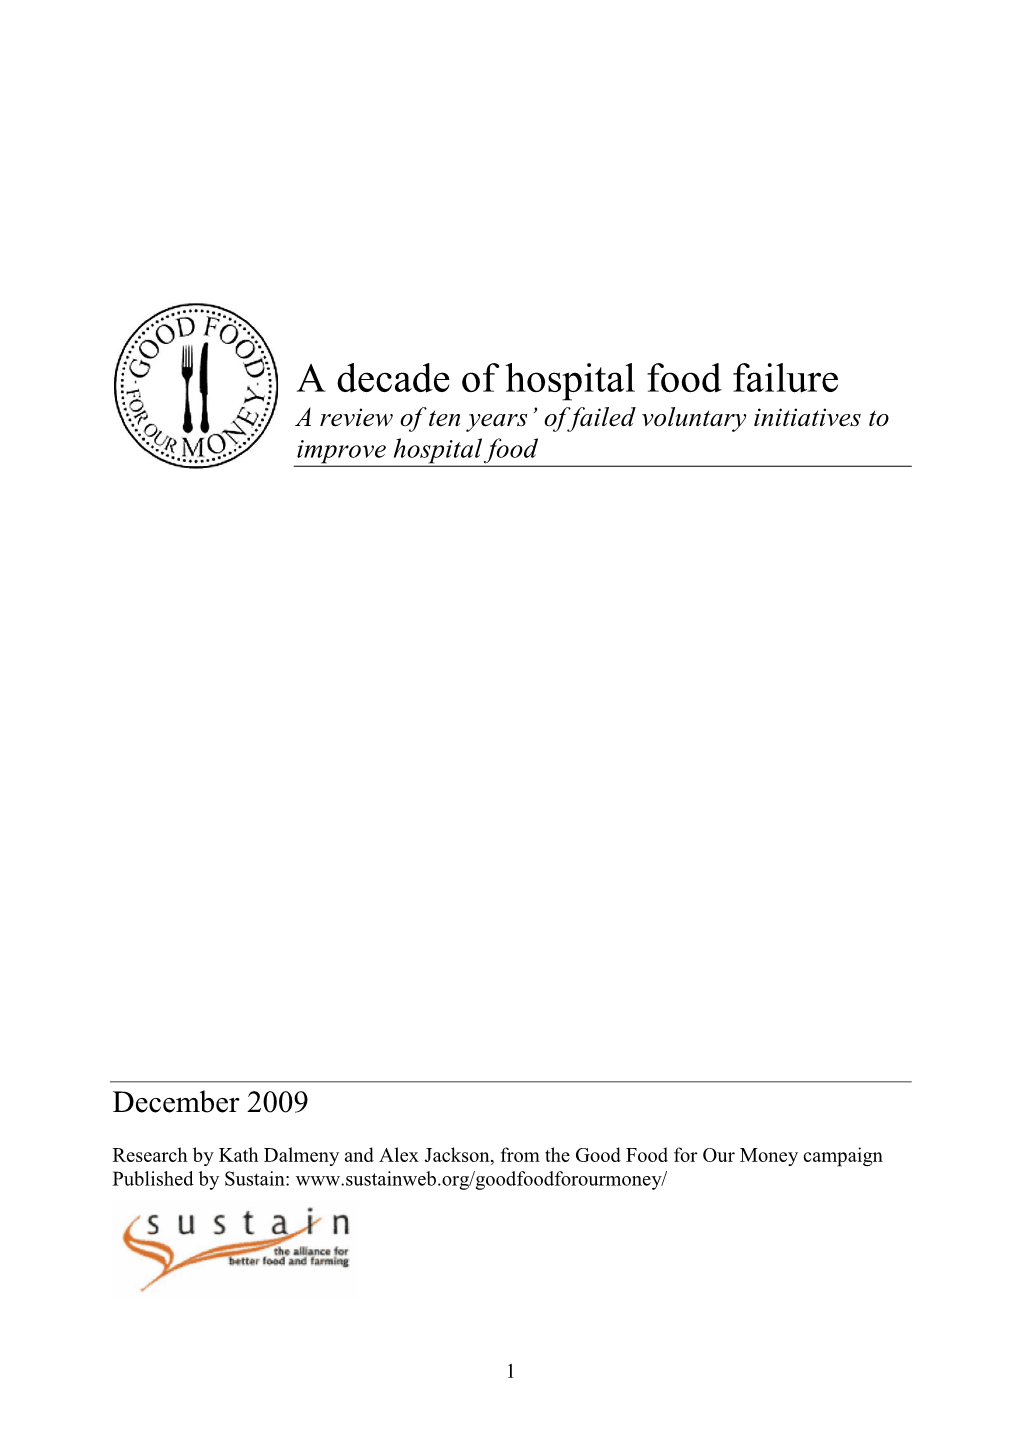 A Decade of Hospital Food Failure a Review of Ten Years’ of Failed Voluntary Initiatives to Improve Hospital Food